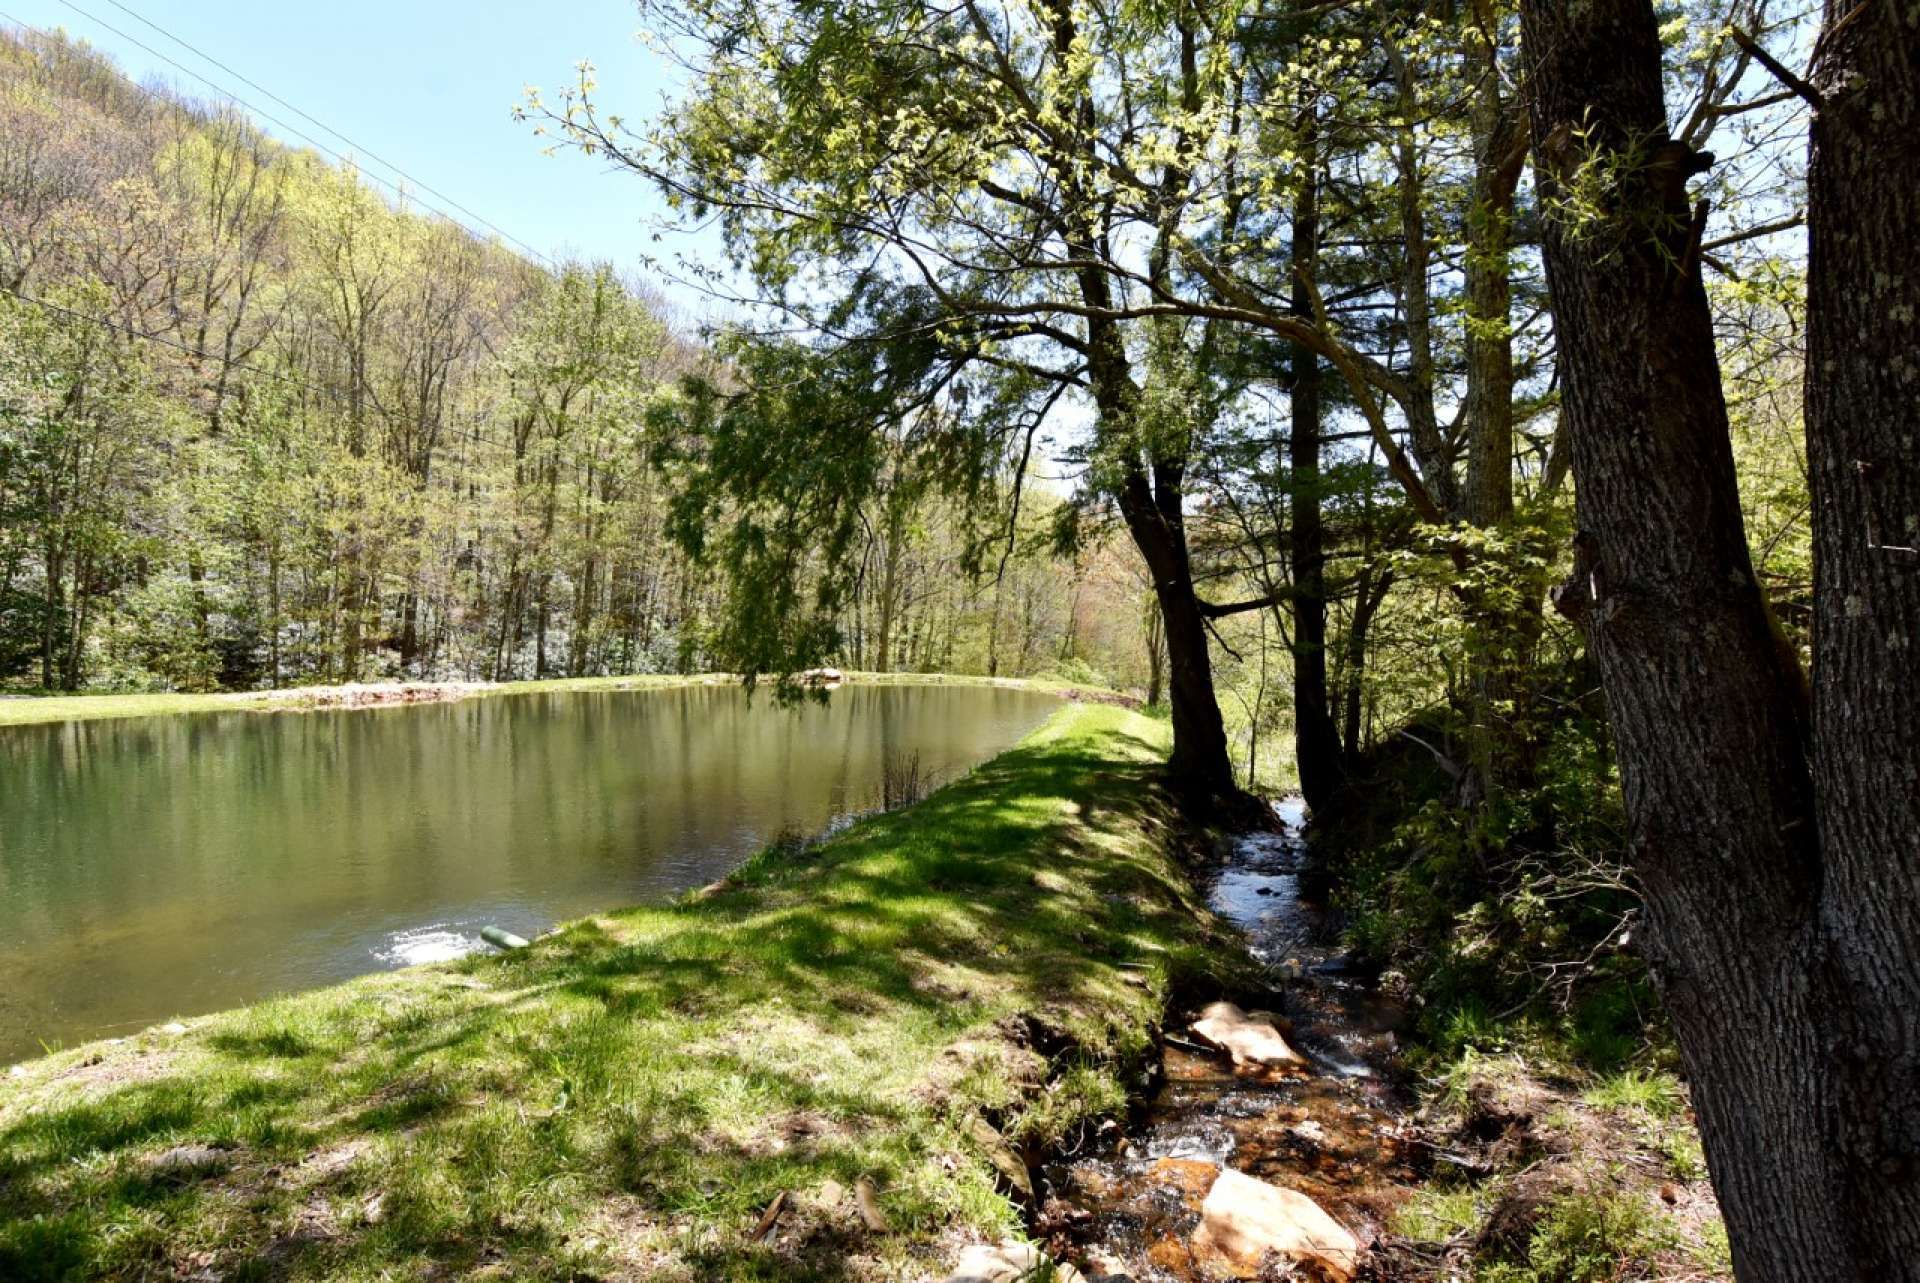 The peaceful 2.68 acre setting is within 600 feet of an access point to the Three Top Mountain Game Lands, a nature conservancy of nearly 3,000 acres for hikers, hunters, and birders.